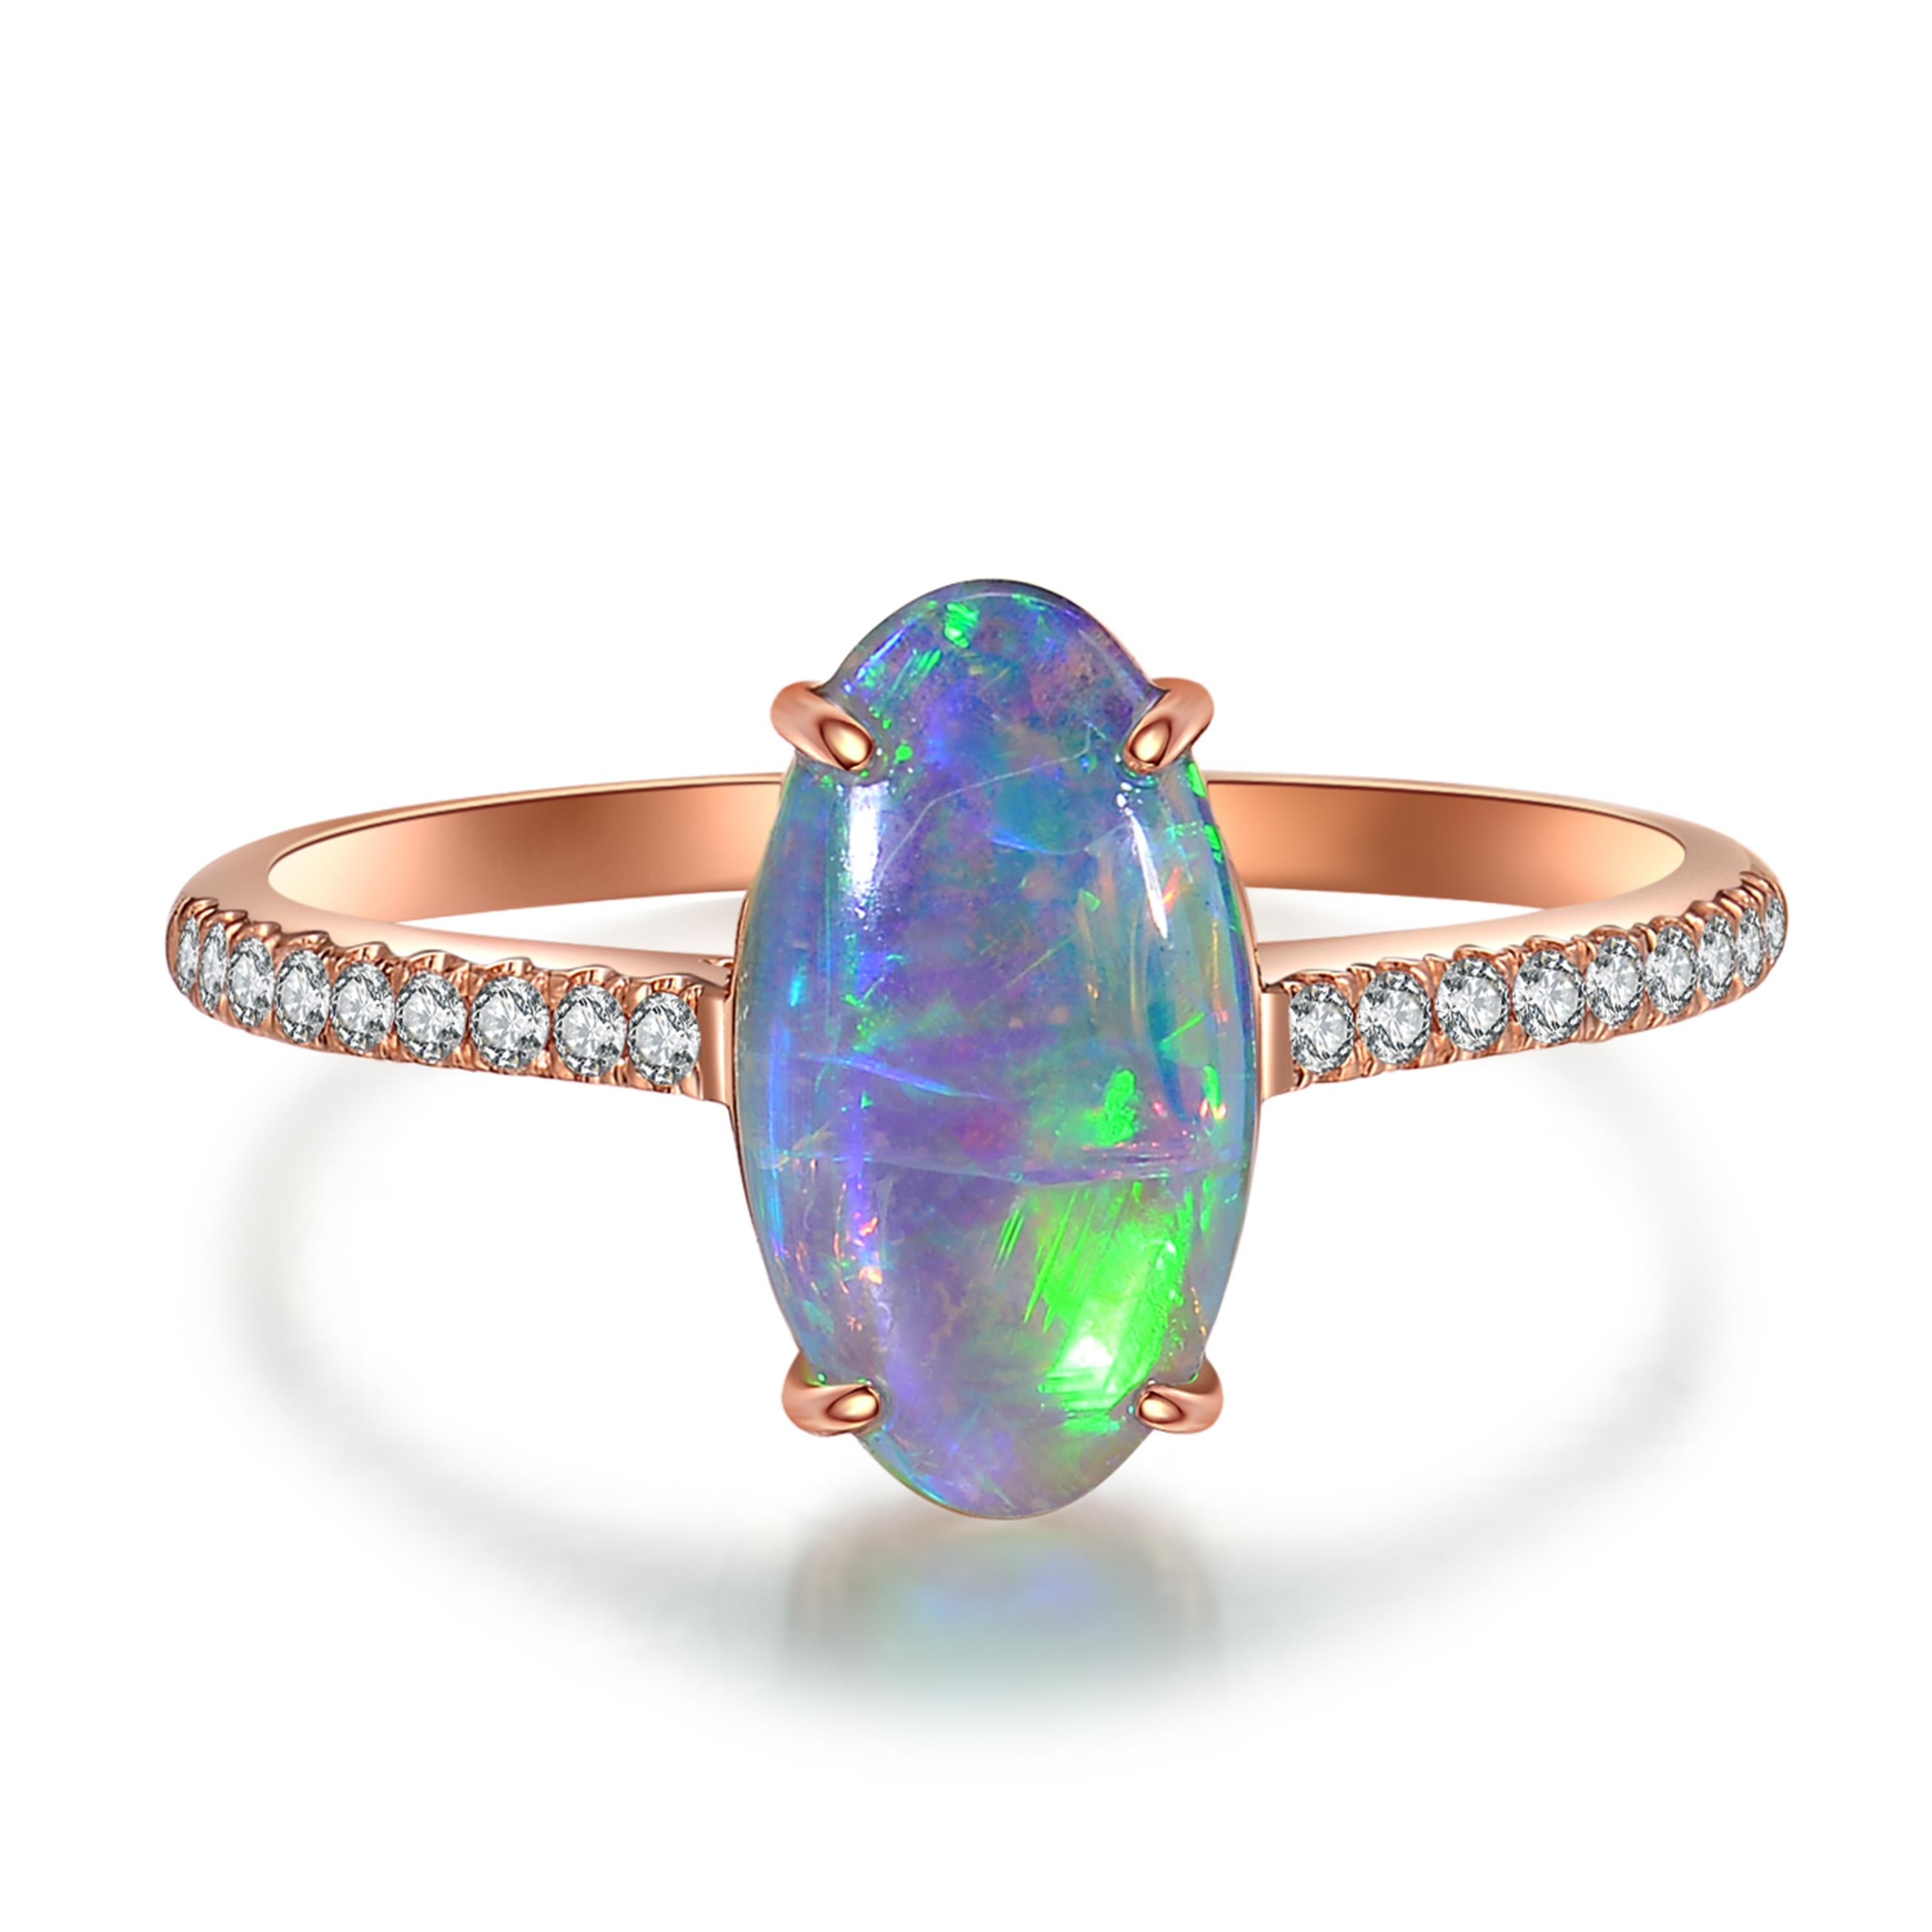 Description:
A one-off prismatic opal ring featuring a stunning play-of colour 2.19ct opal and shoulder set 0.115ct diamonds, set in 18ct rose gold. 

Opal care: Clean opals with lukewarm soapy water.

Specification:
Weight: 1.77gm
Ring size: N (UK)